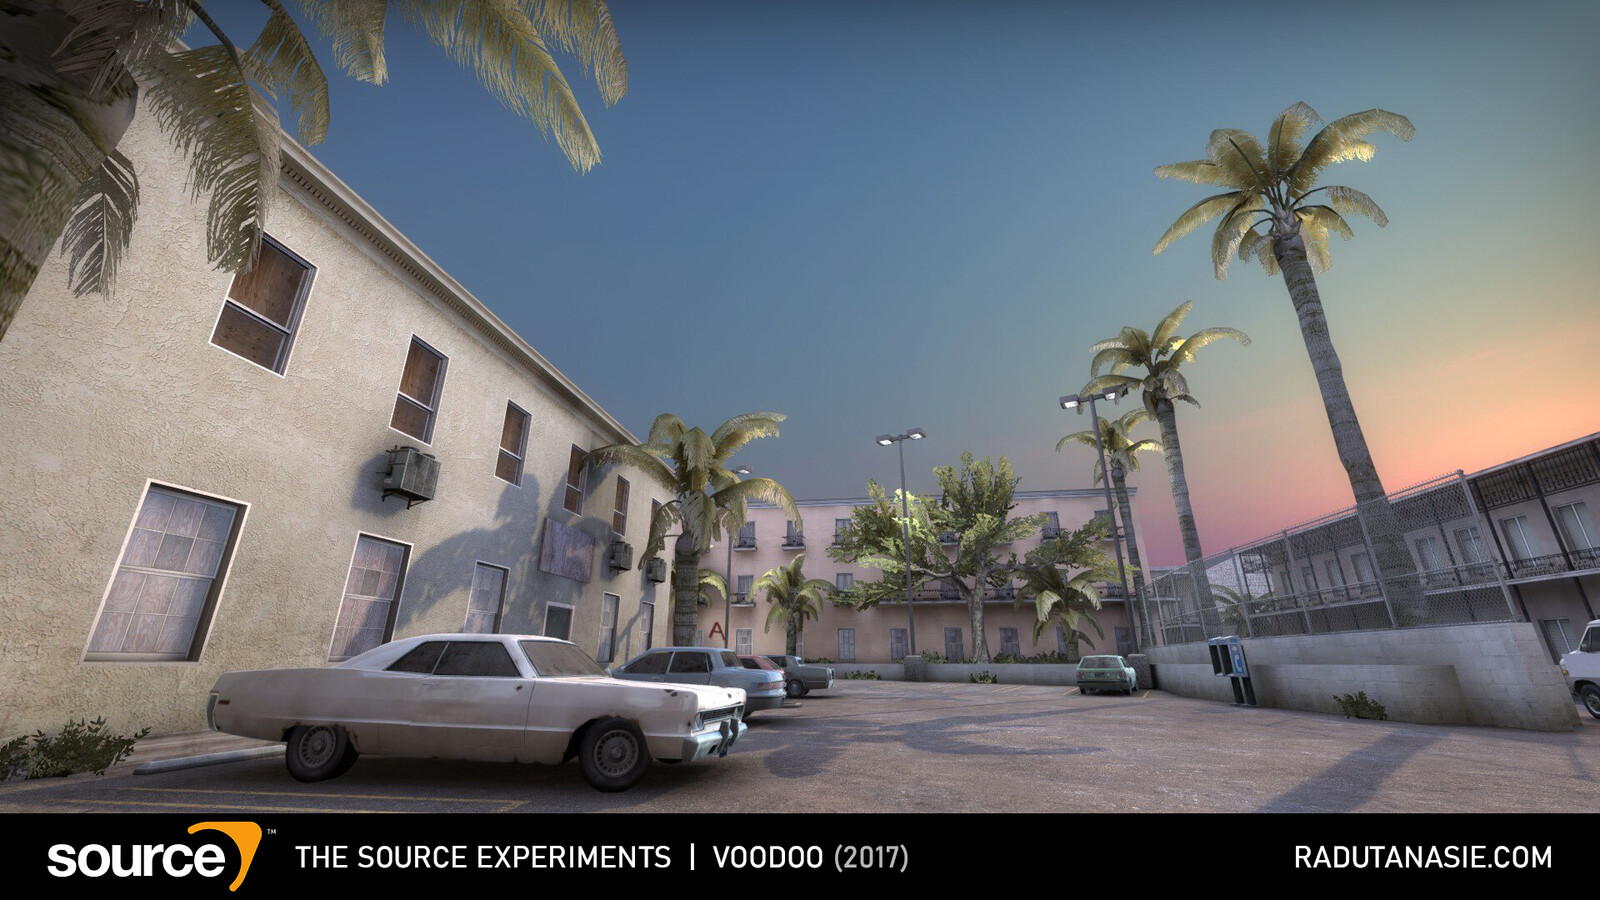 Voodoo is a bomb/defuse map for Counter-Strike: Global Offensive set in the city of New Orleans. The map has been designed as part of a personal 11 days level design challenge.